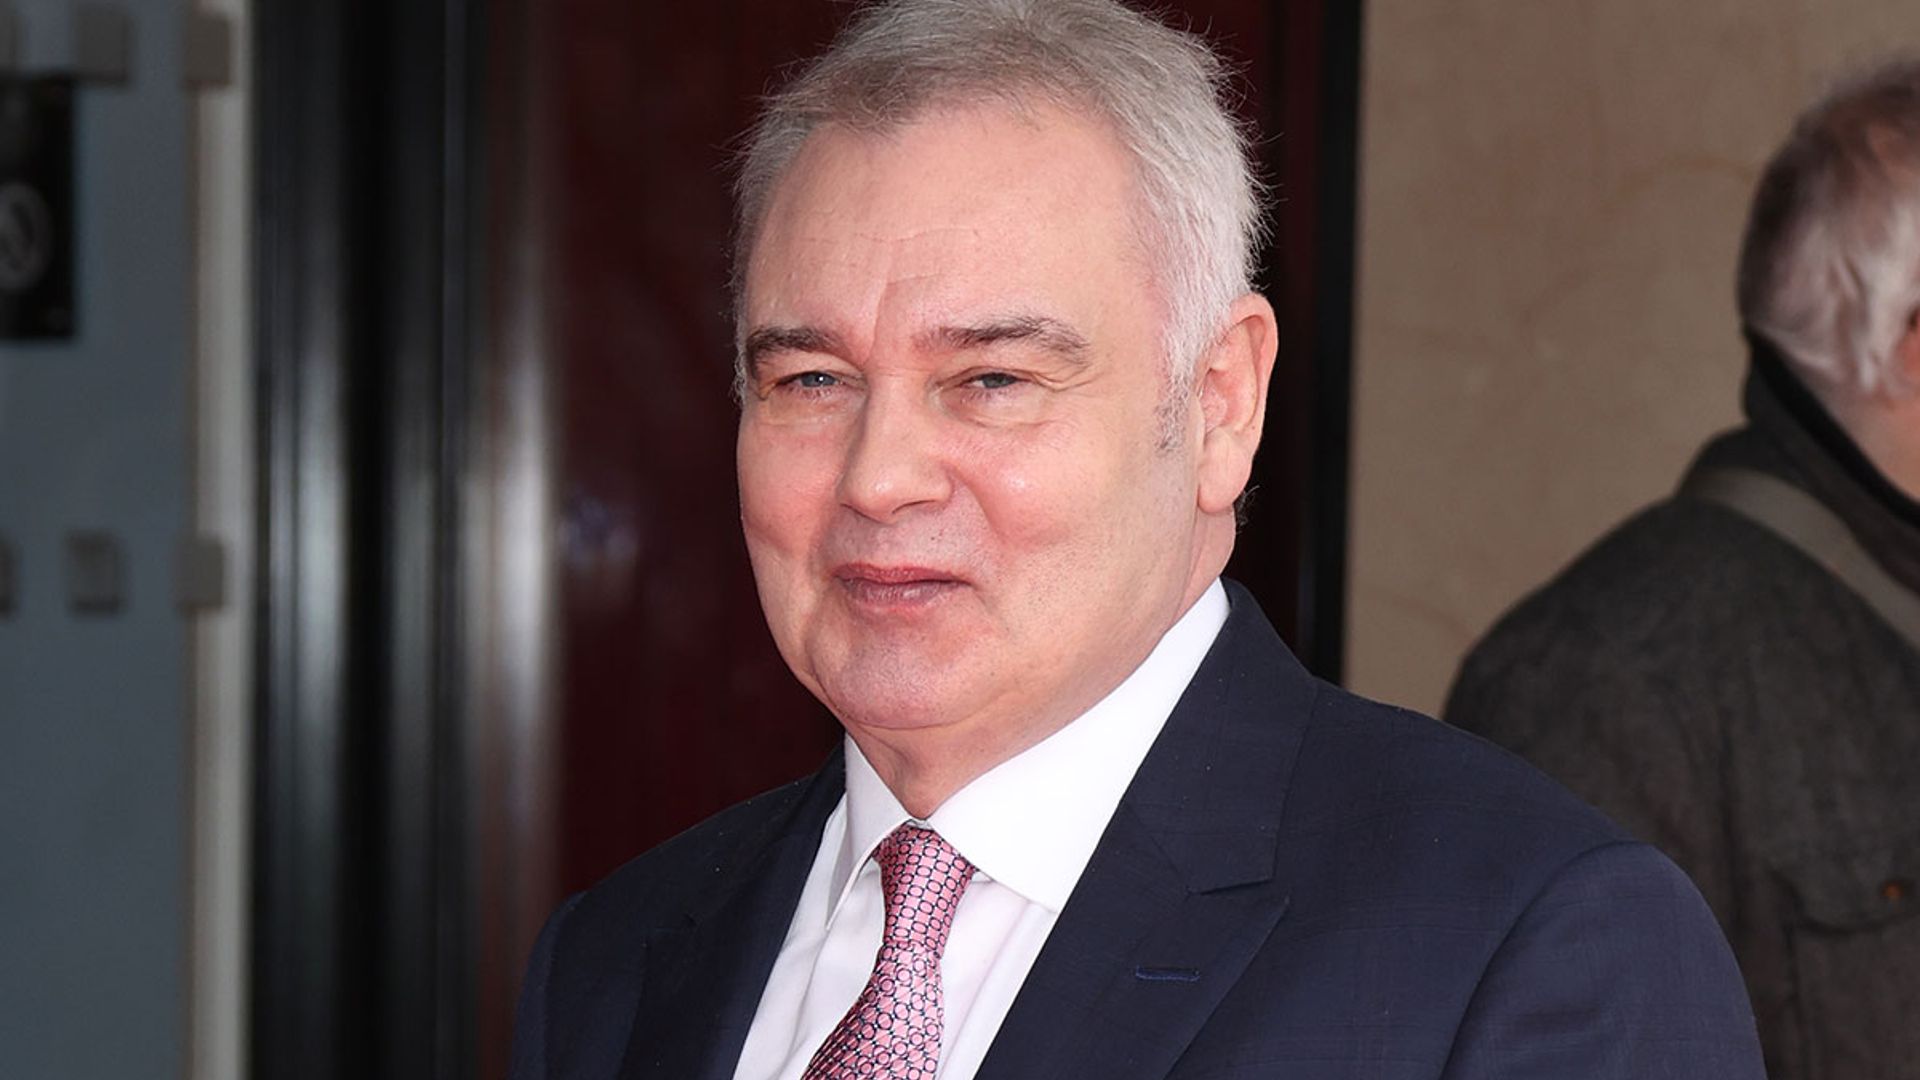 This Morning's Eamonn Holmes shares 'pensive' photo - and fans react